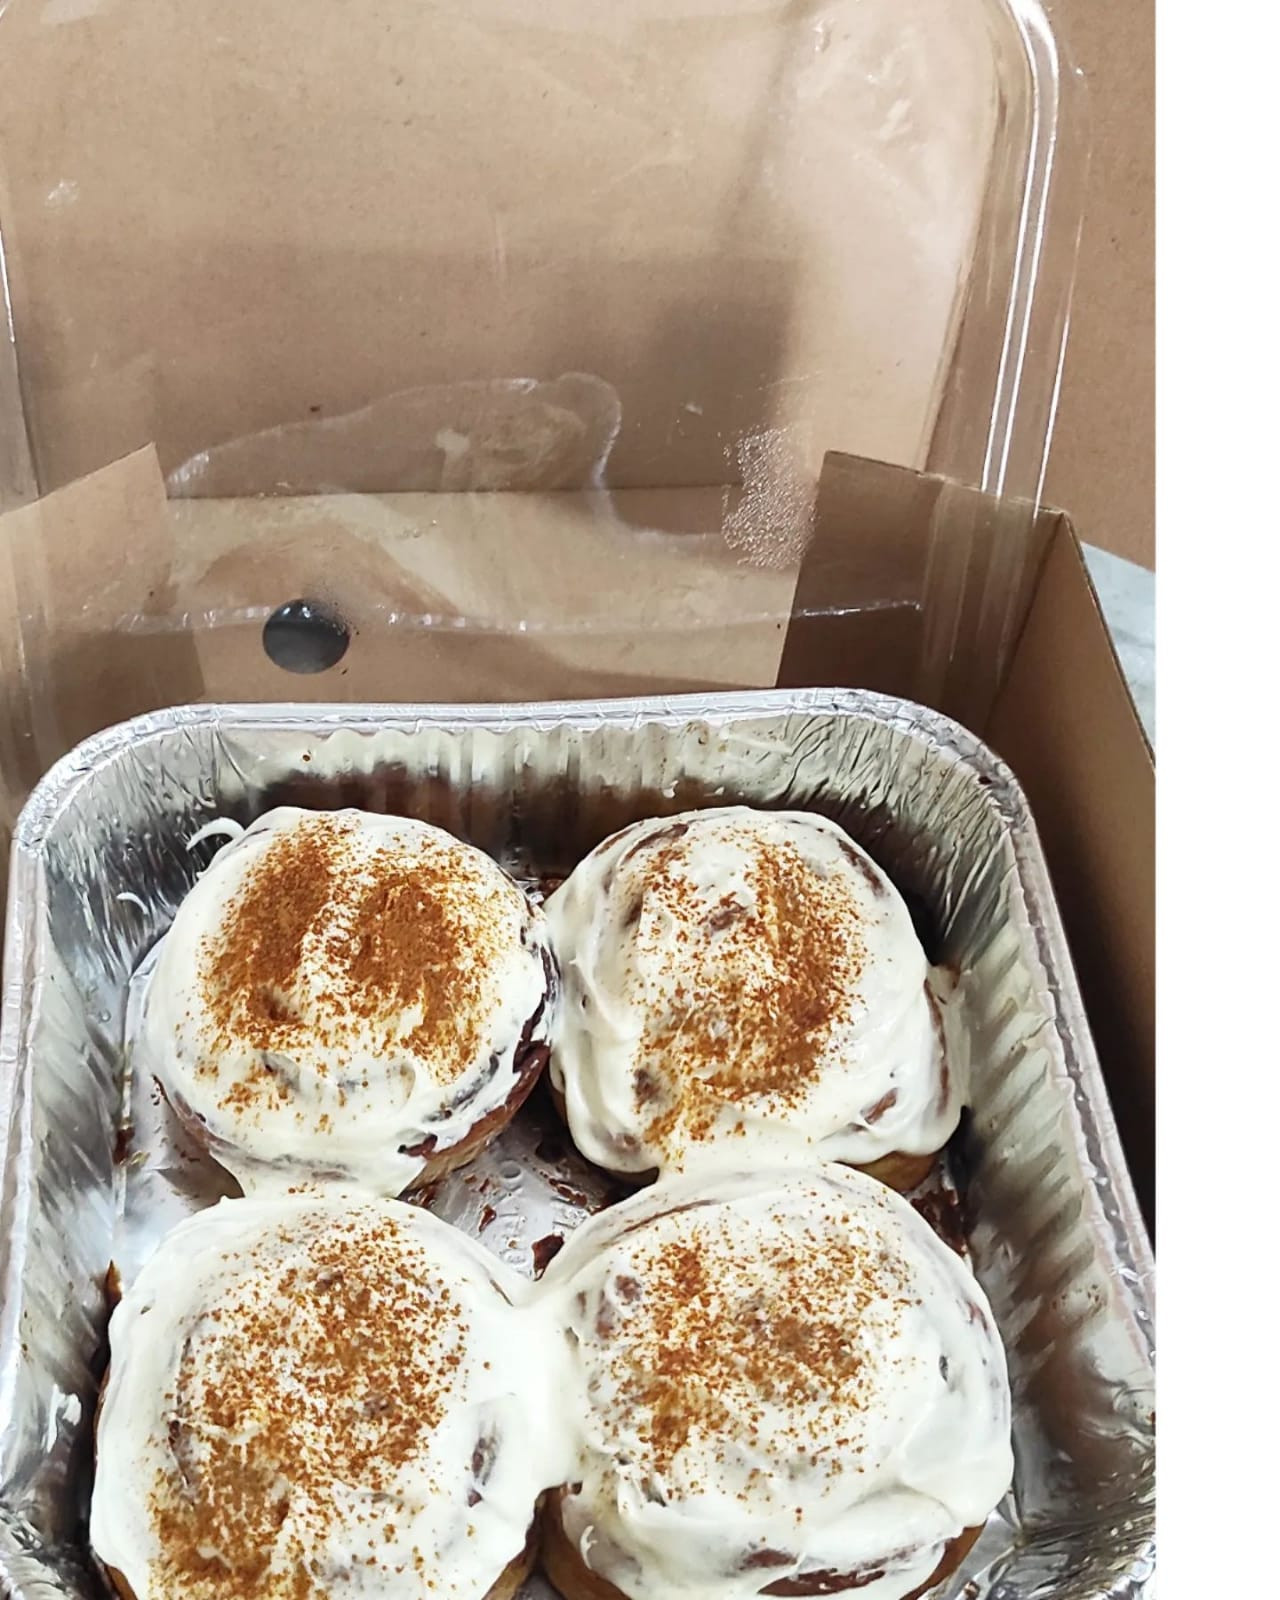 Cinnamon rolls with cream cheese frosting 4 pcs